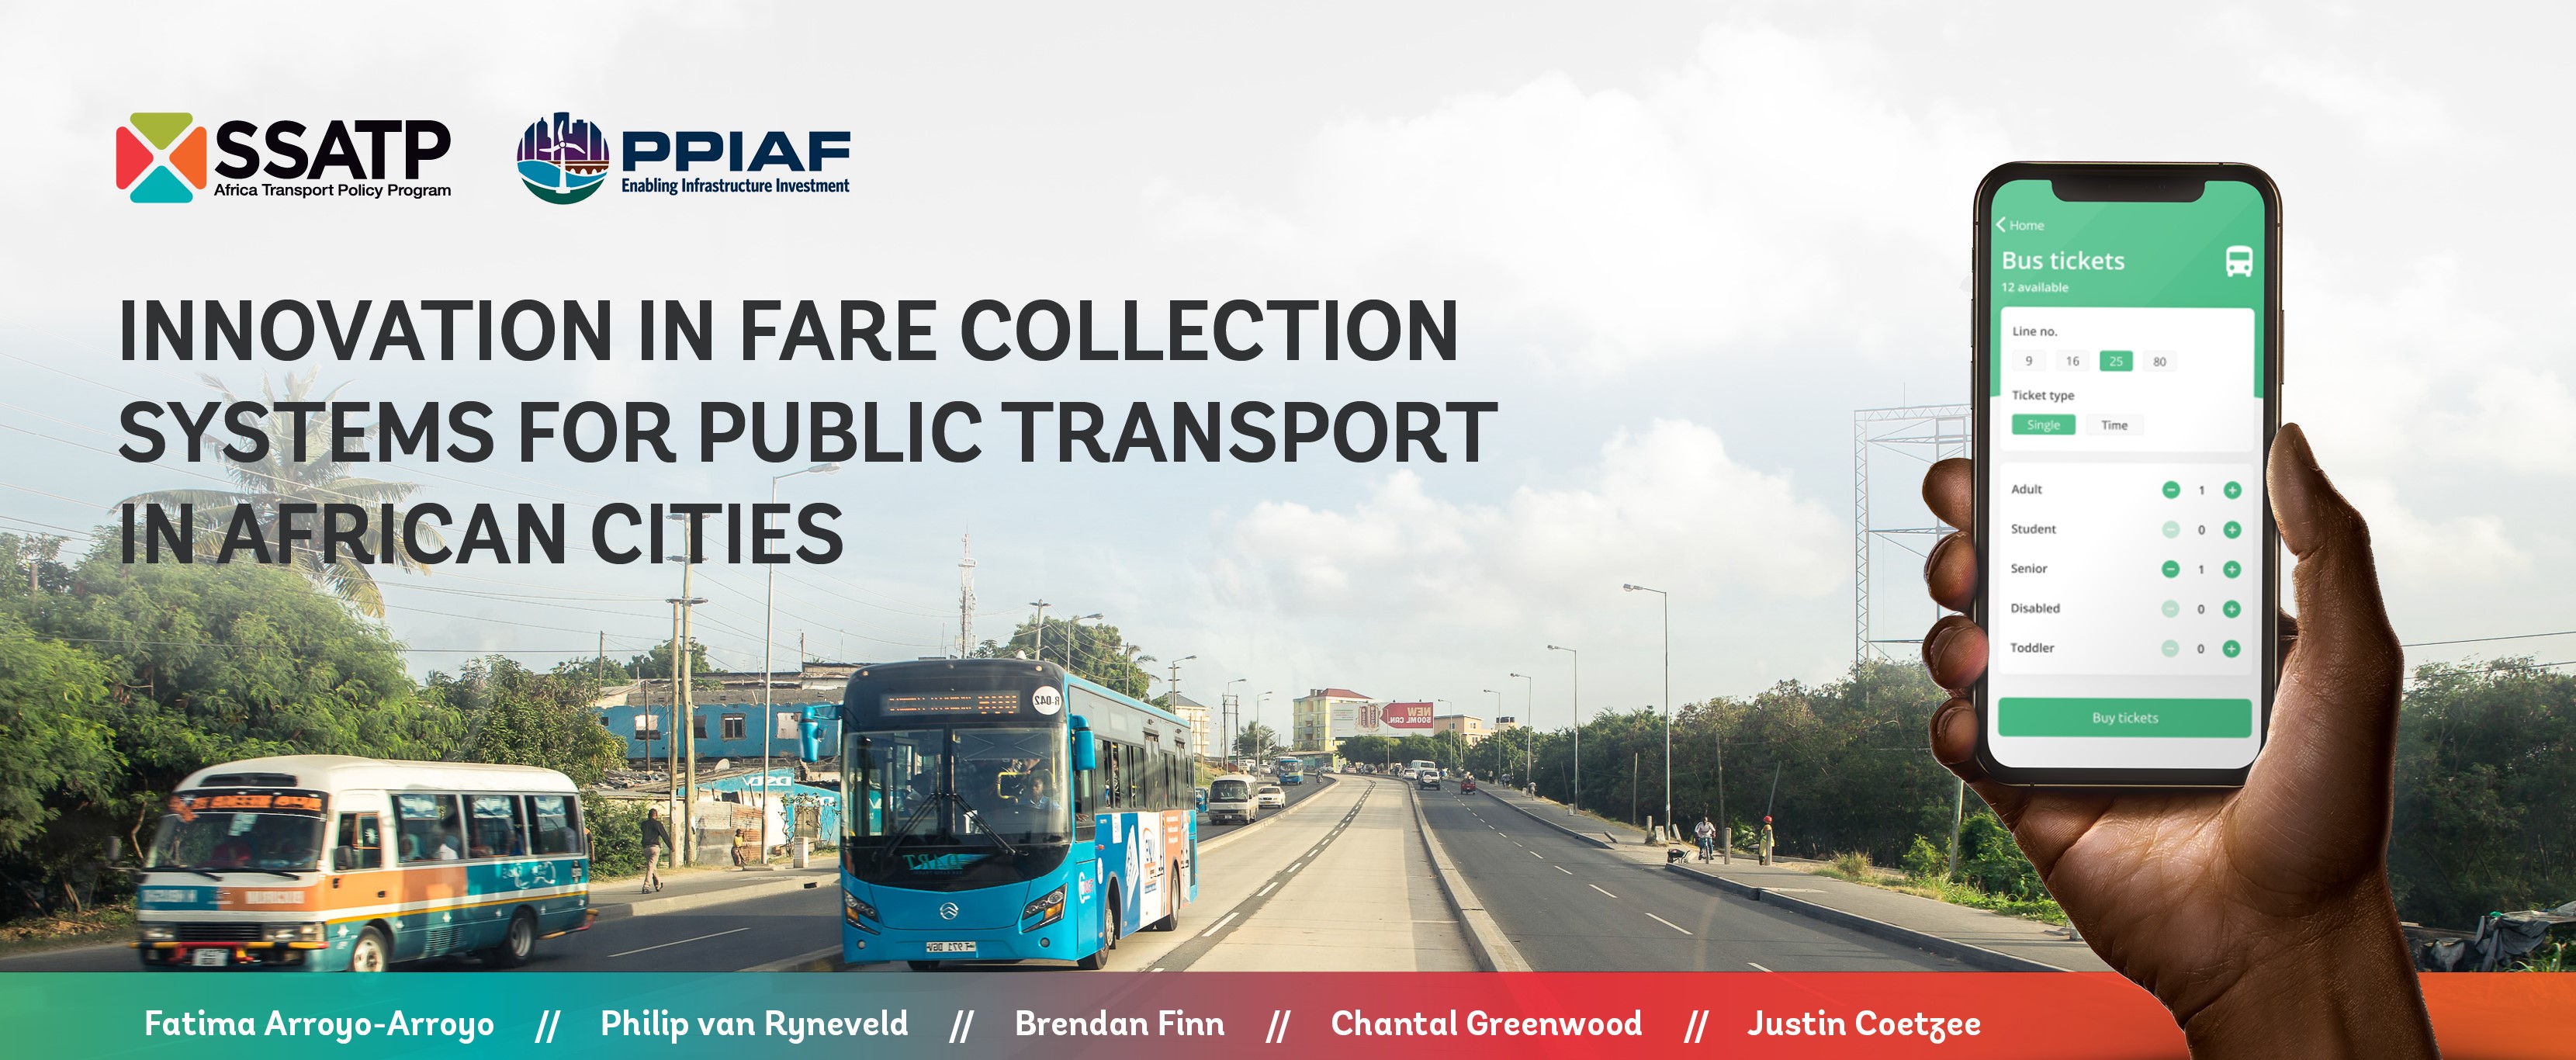 Innovation in Fare Collection Systems for Public Transport in African Cities